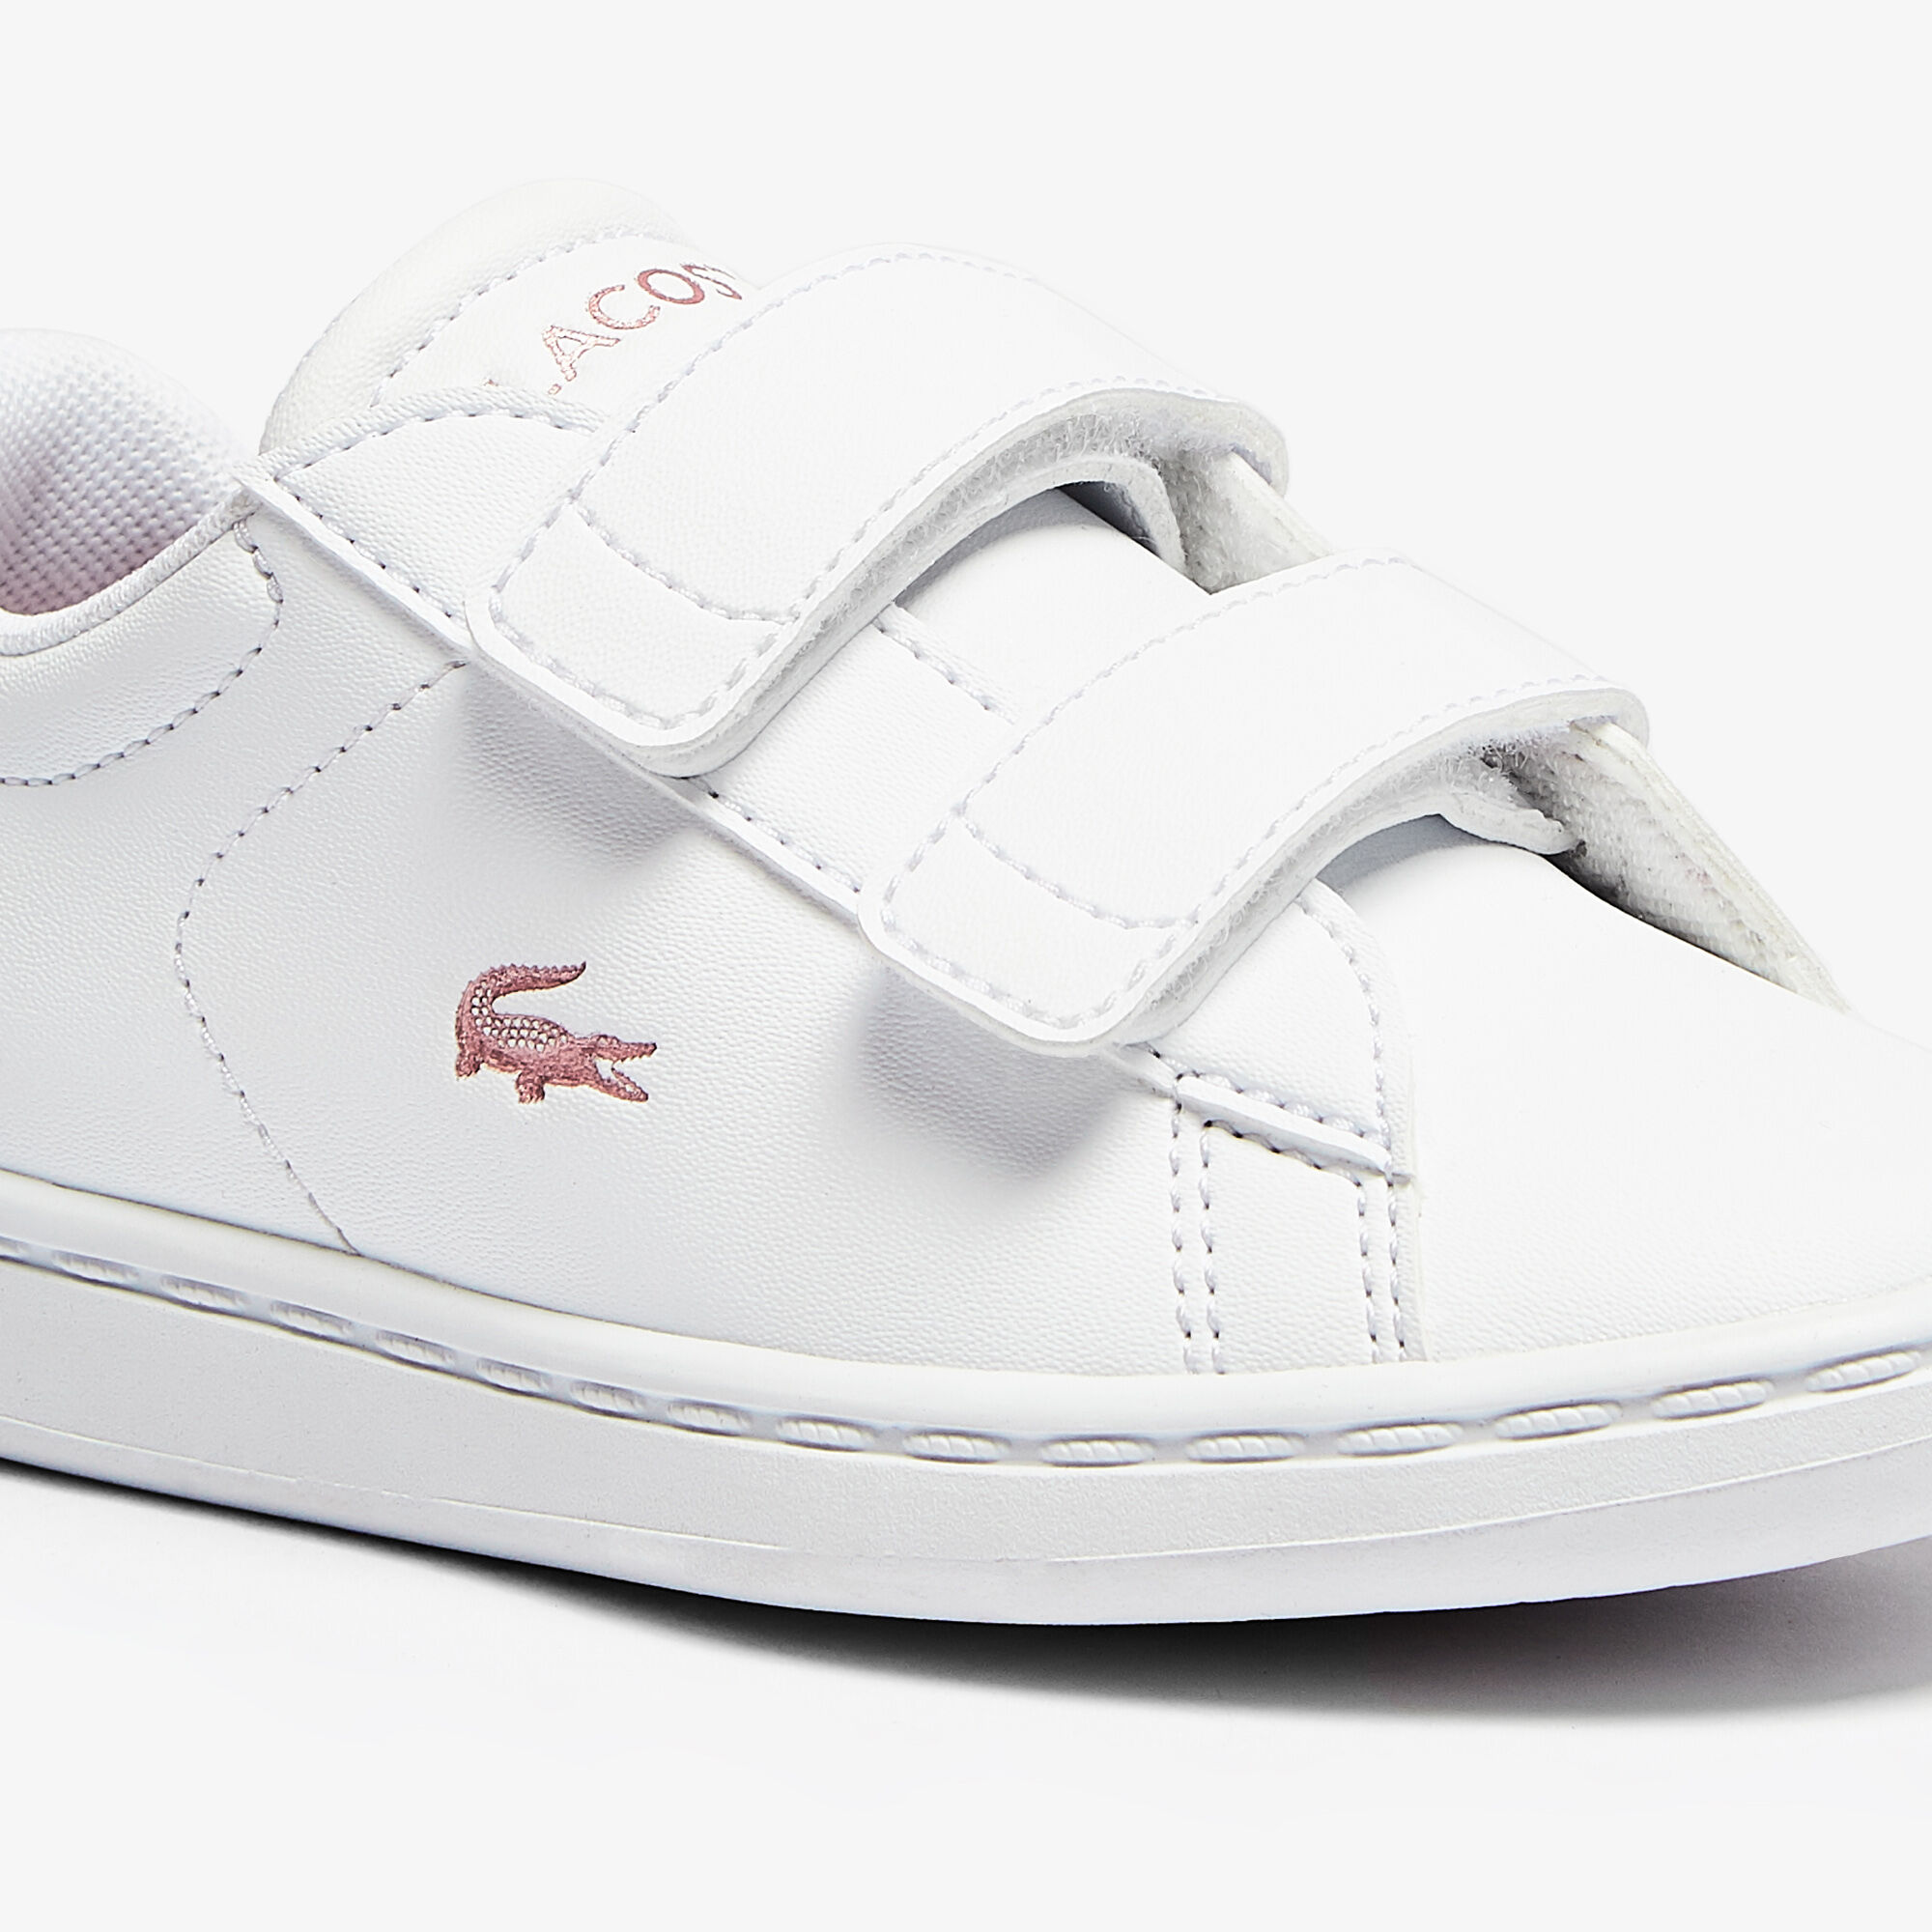 Infants' Carnaby Evo Metallic Accent Trainers